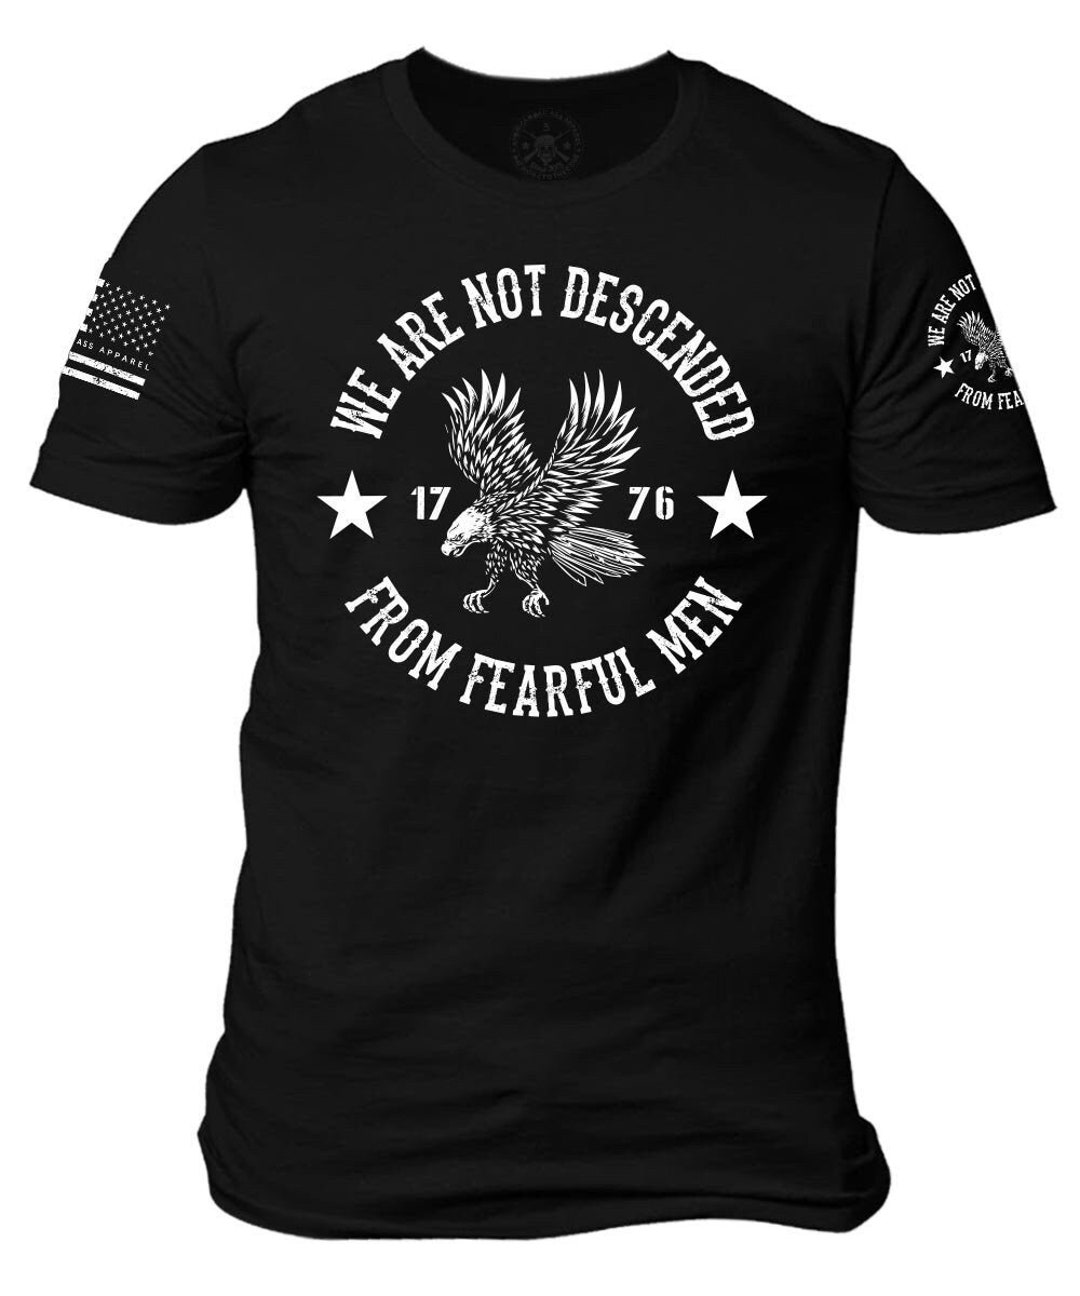 We Are Not Descended From Fearful Men T-shirt Since 1776 - Etsy